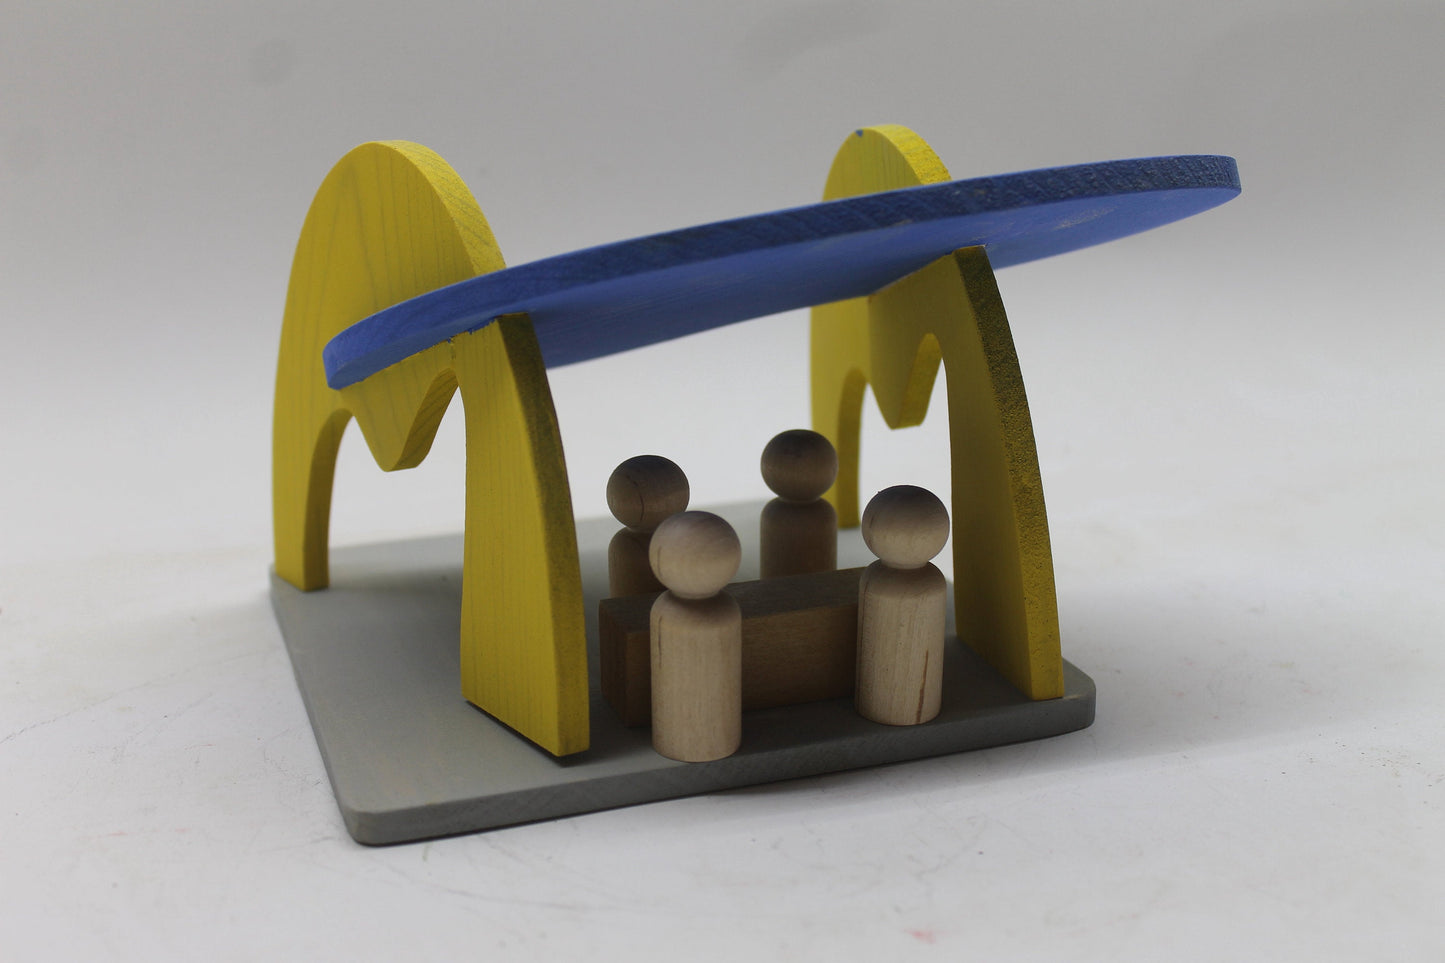 Fast food restaurant solid wood toy. This play set will give children much to play with as it includes a restaurant, vehicles, and people